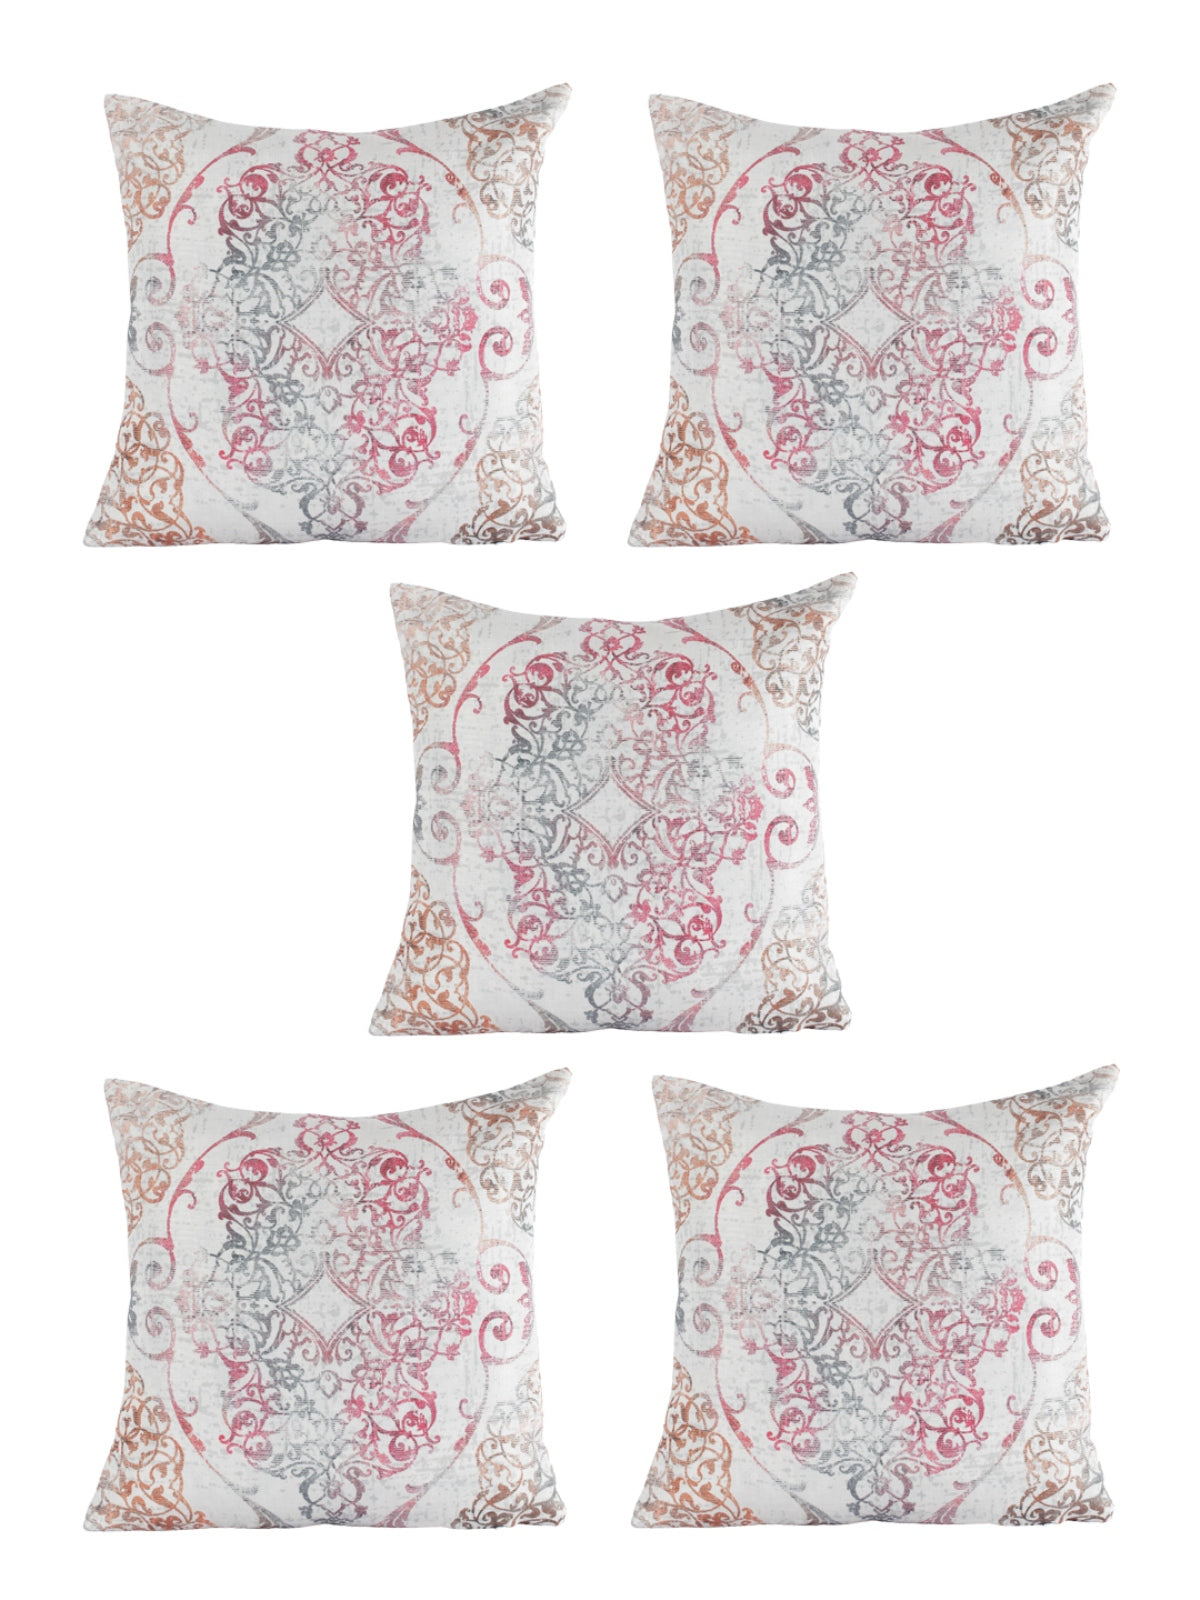 Ethnic Motifs Polyester Cushion Cover 16x16 Inch, Set of 5 - Off-White